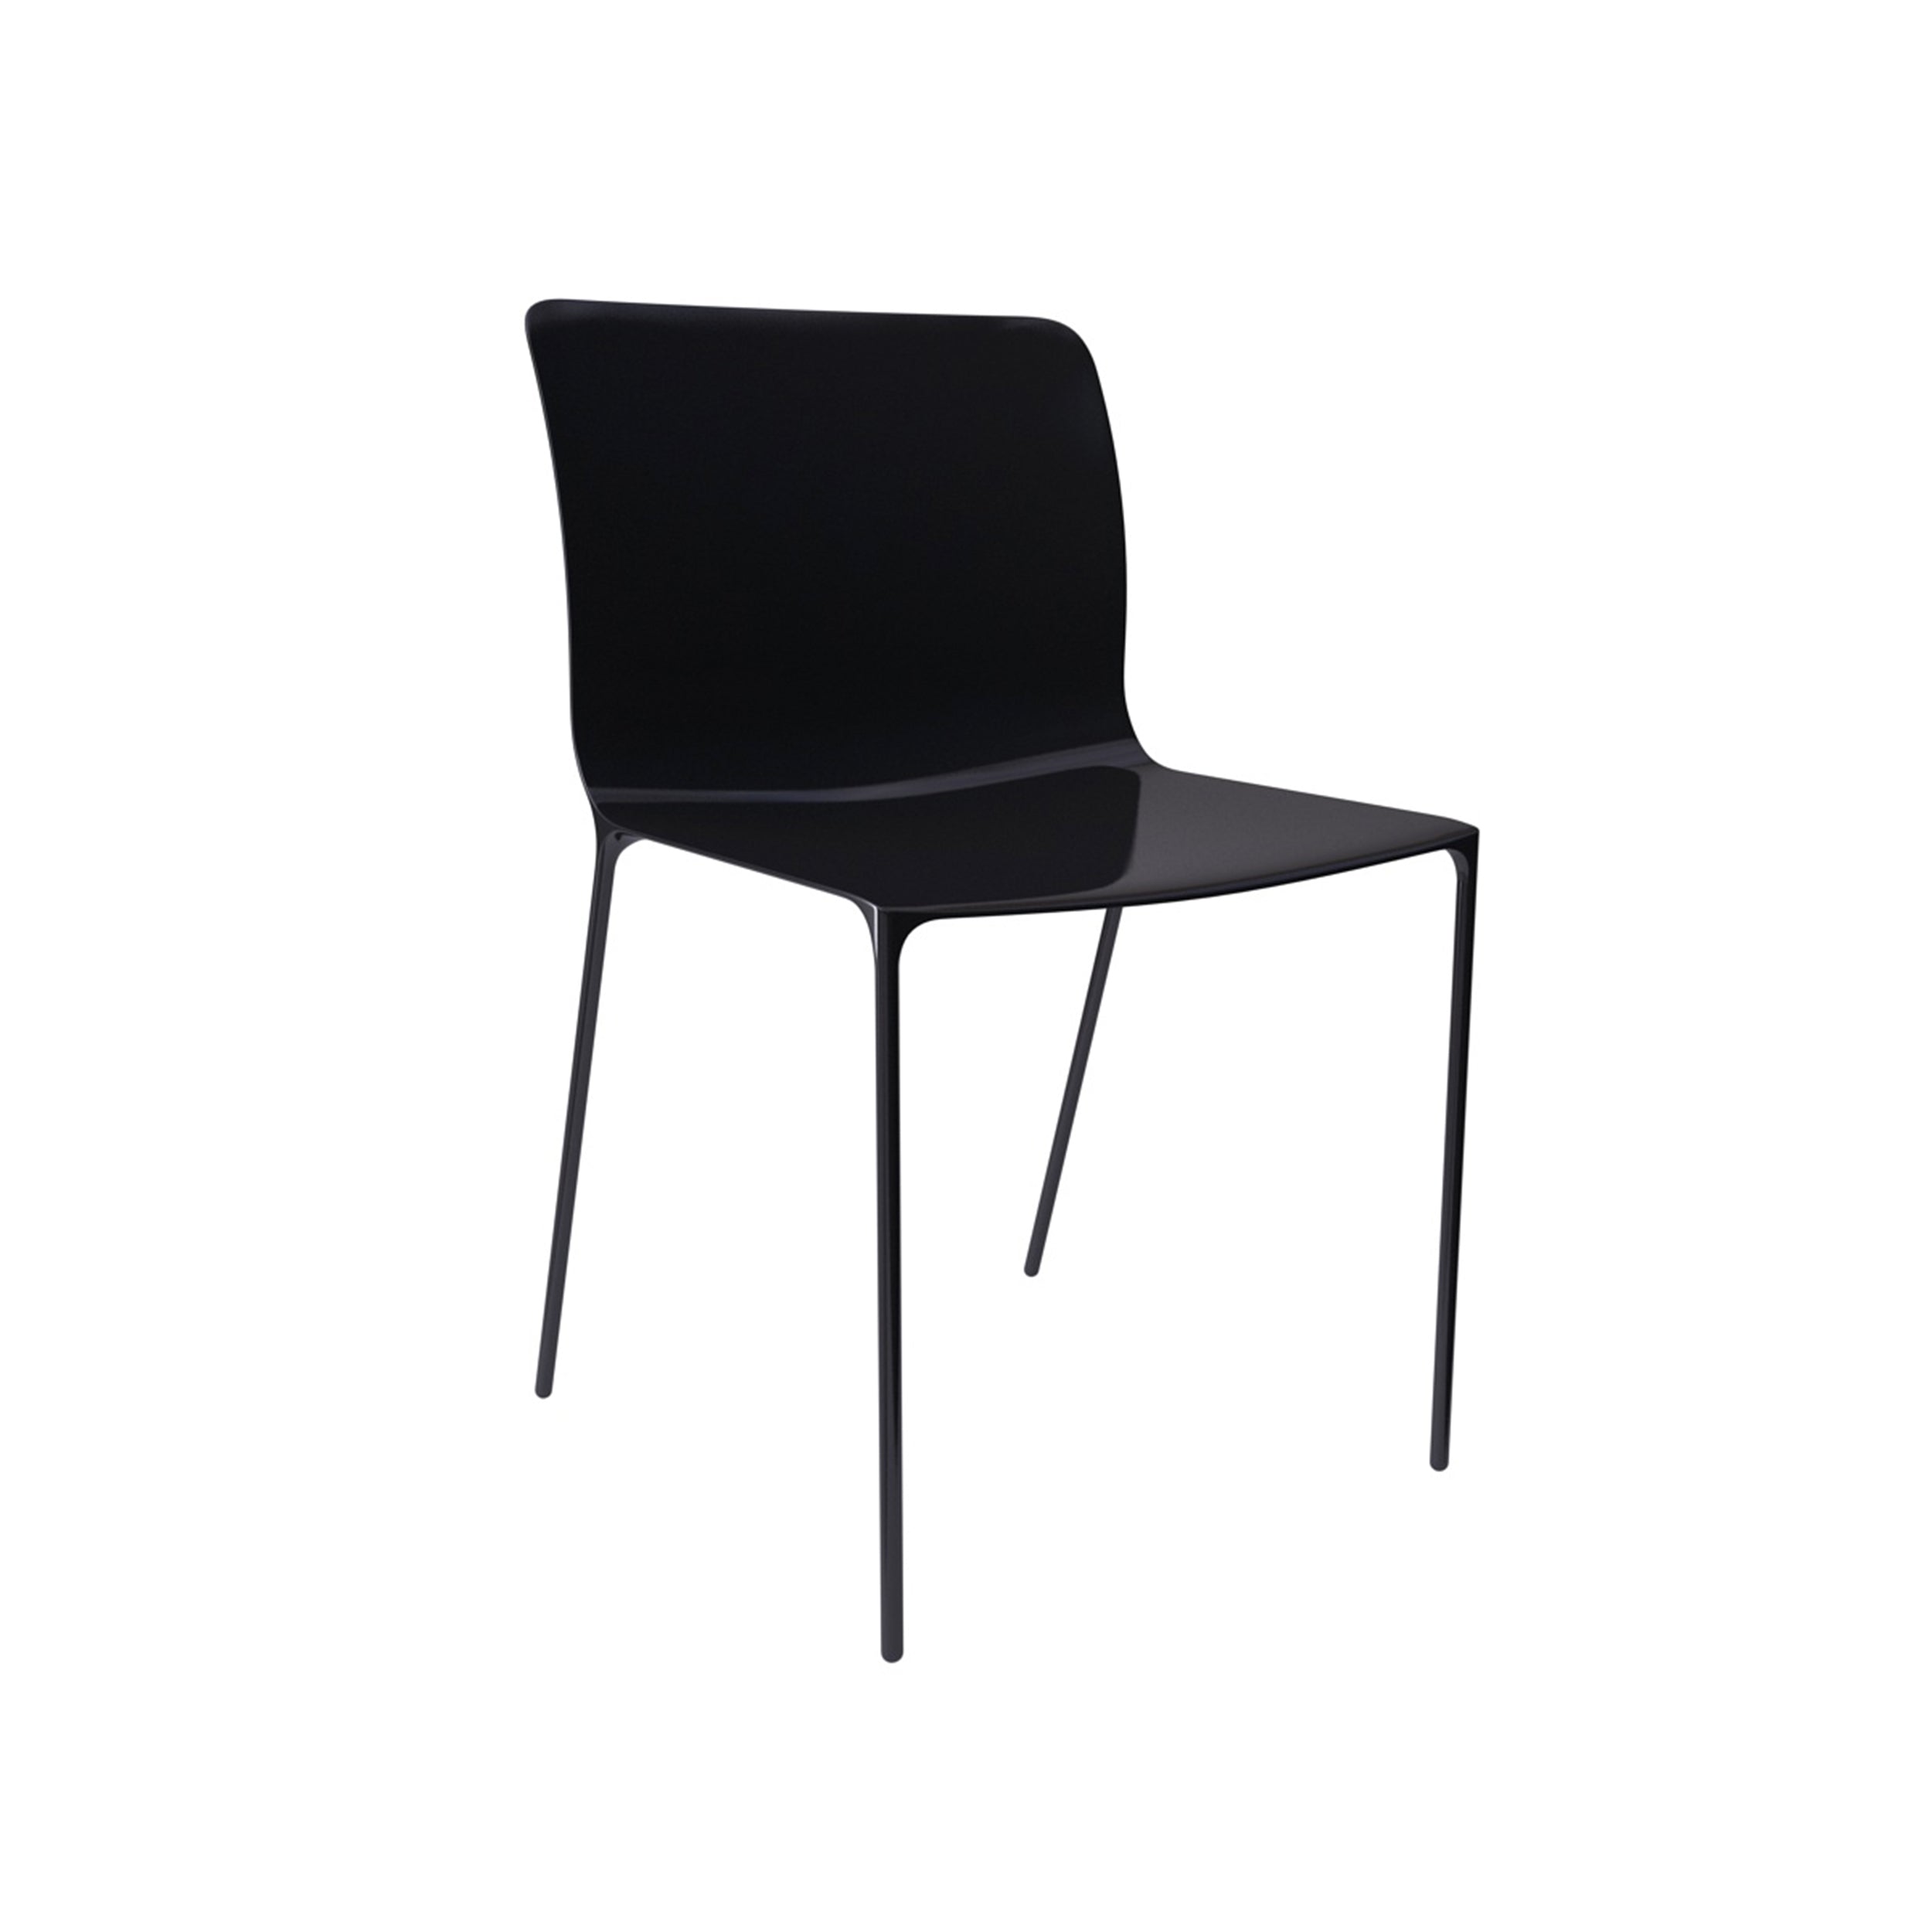 Surface Chair